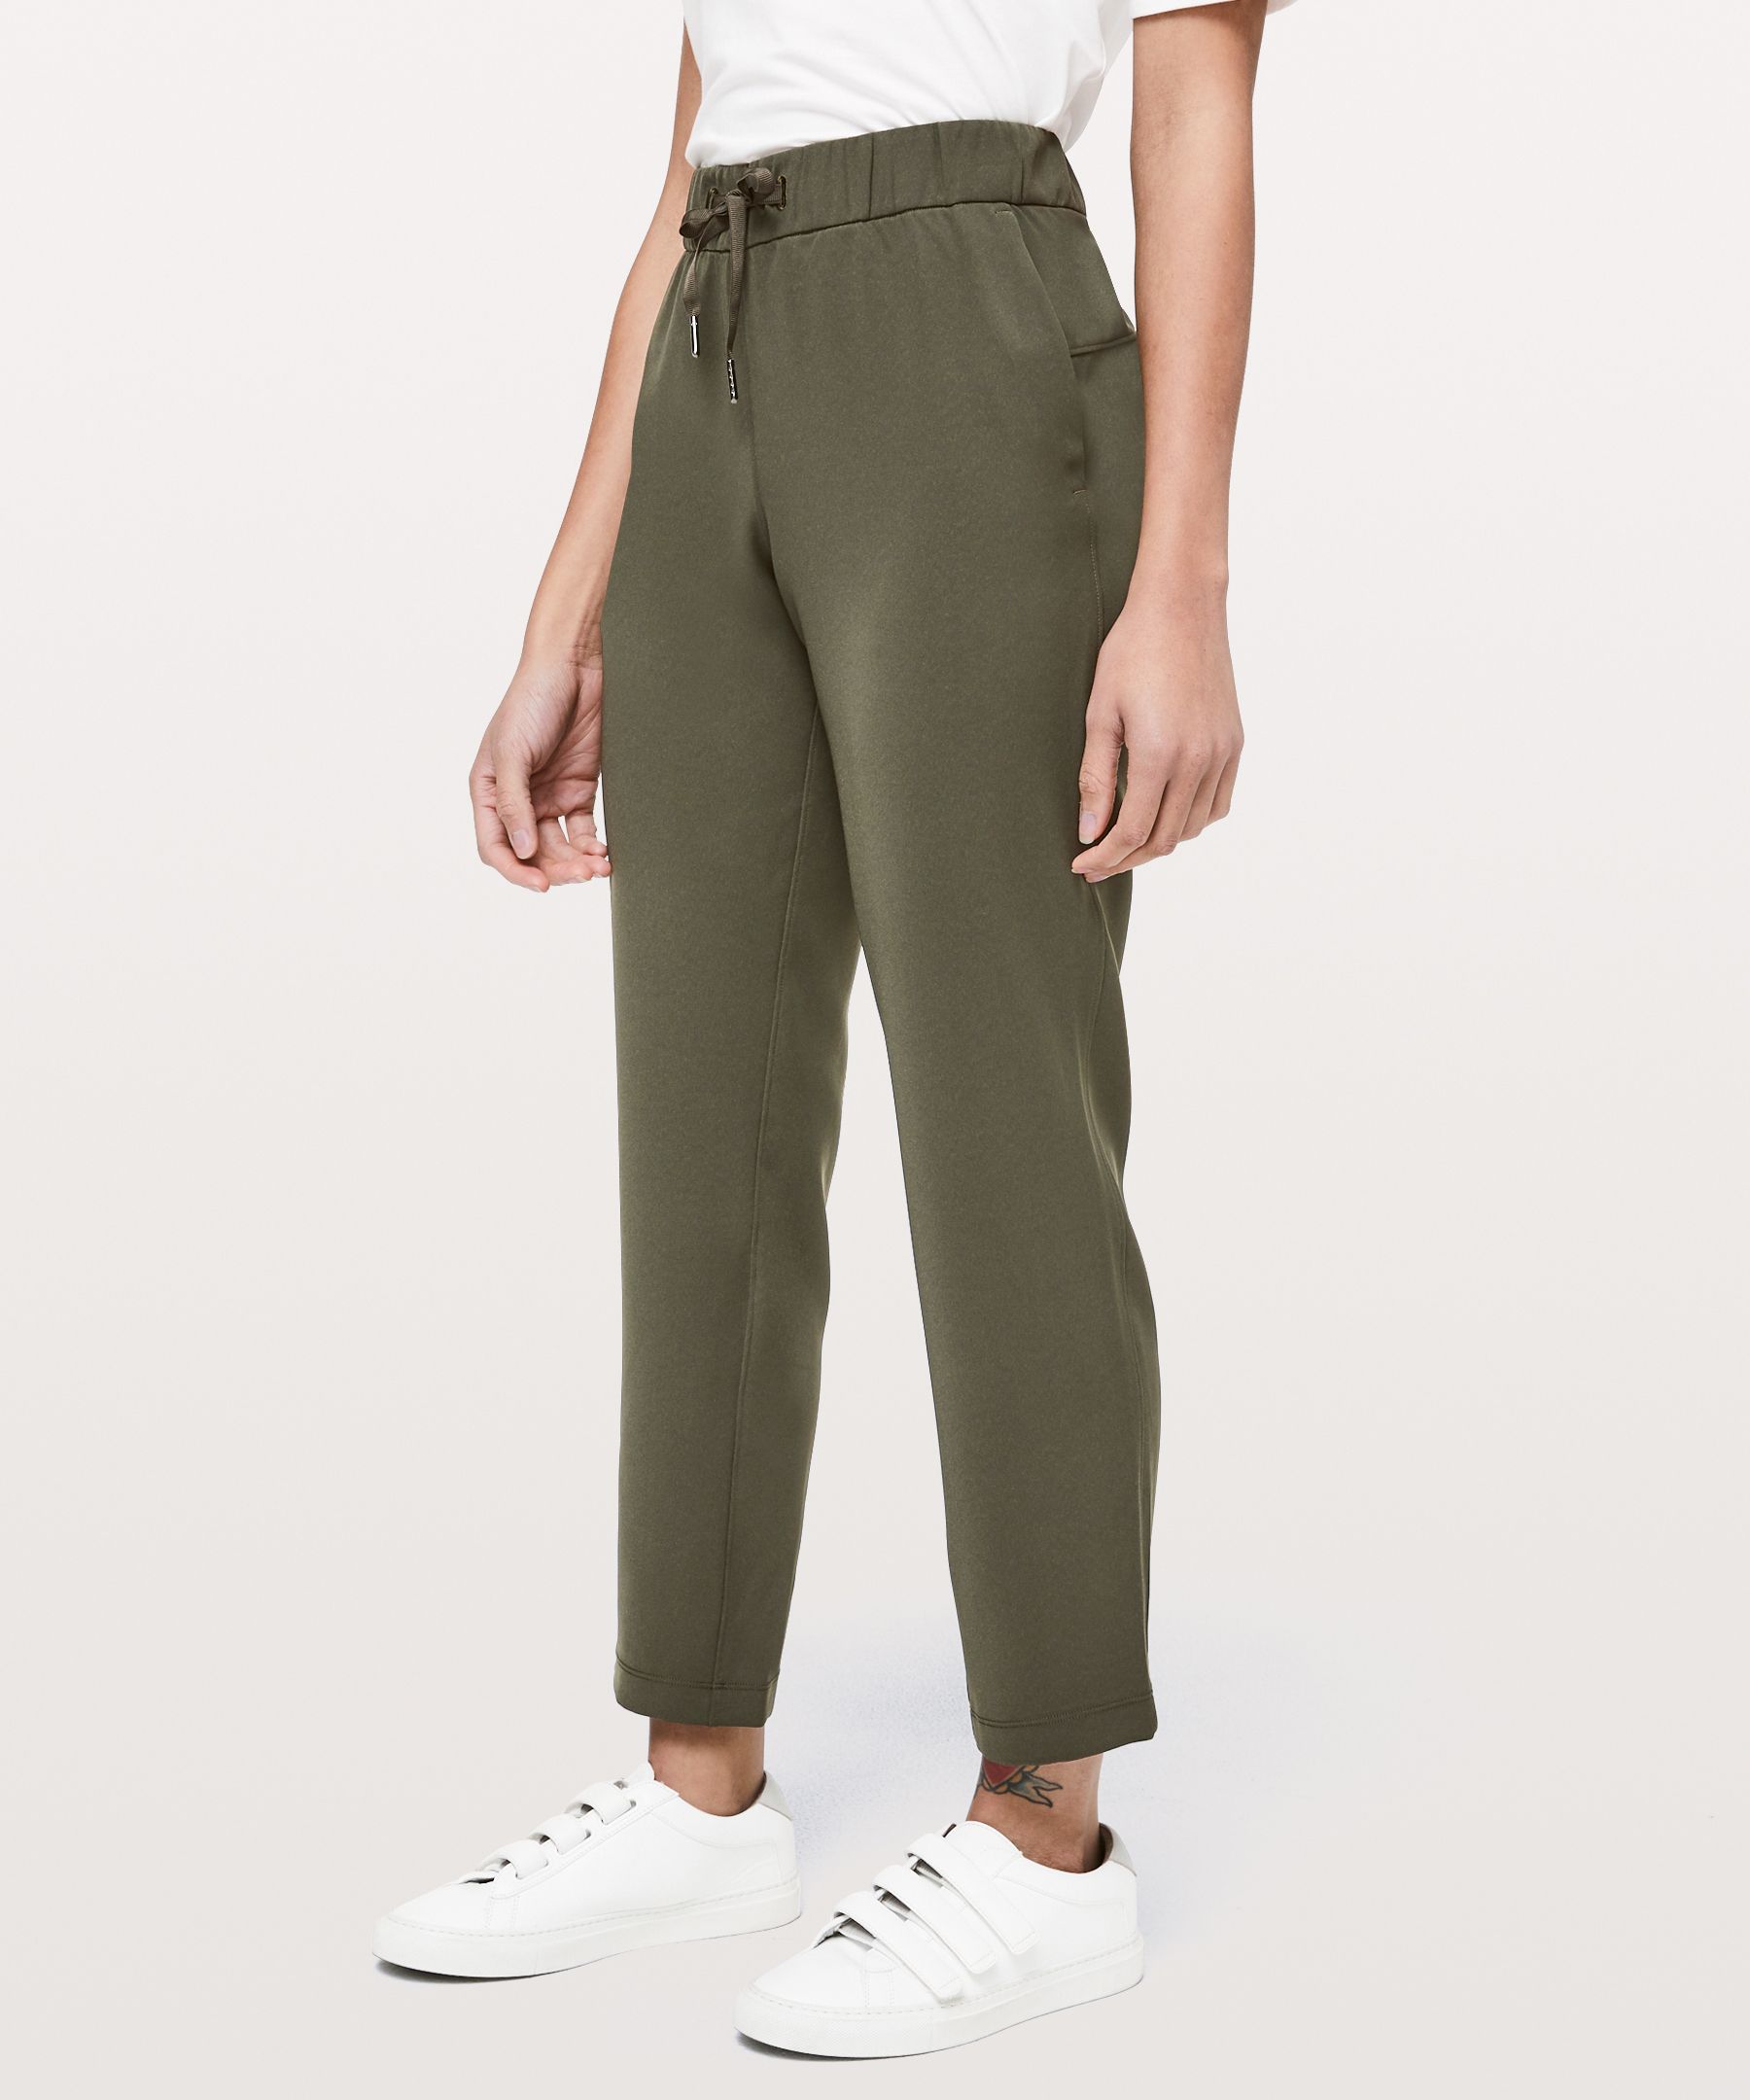 Lululemon On The Fly Pant Reviews 2019